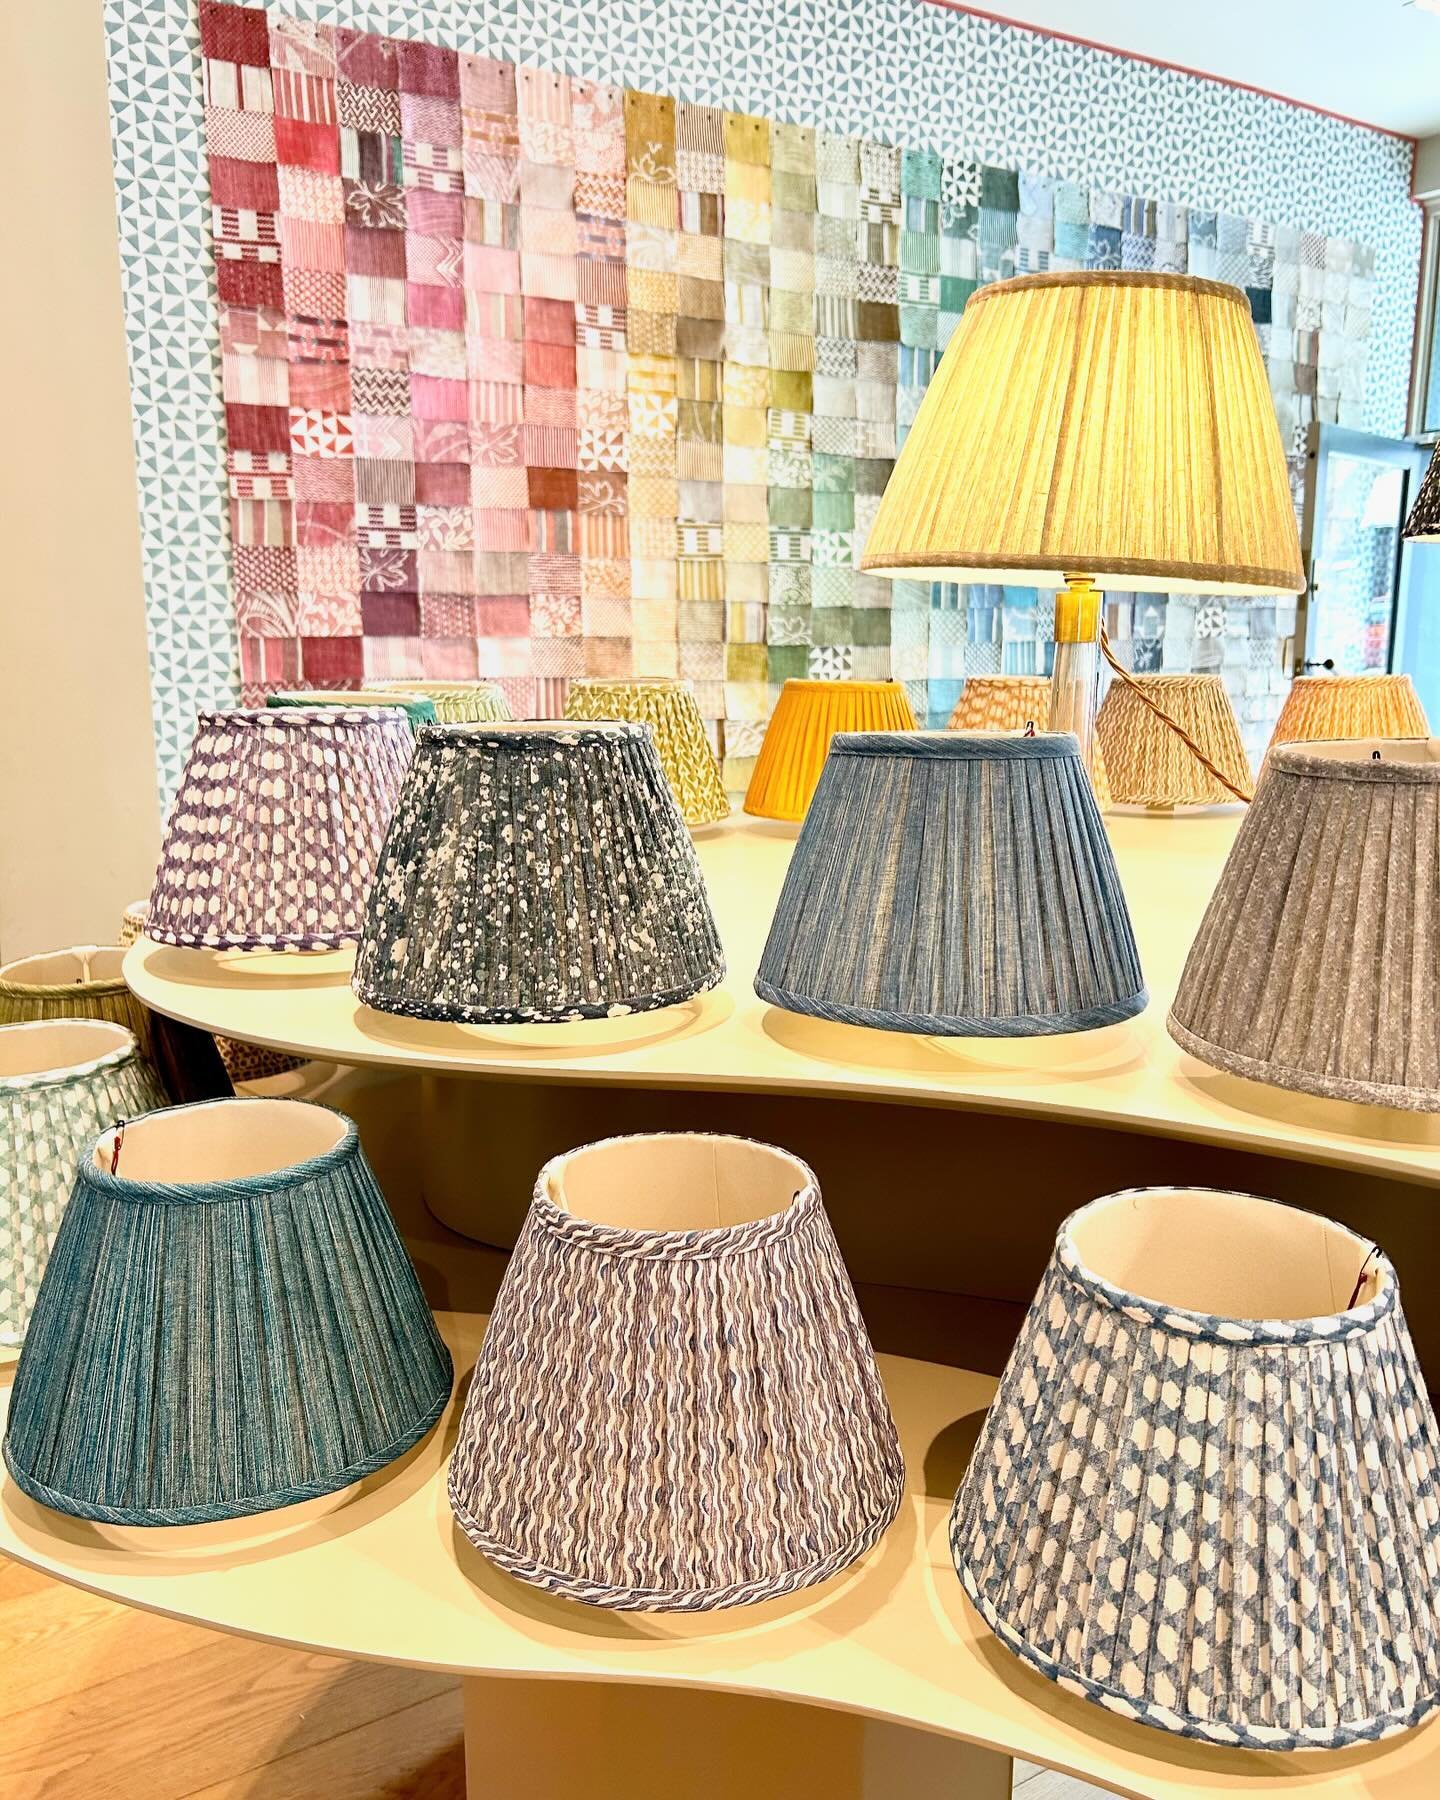 Today was a day of wondrous colour starting with a lovely visit to the London showroom of @fermoie 💞🇬🇧 Thank you so much for your generous hospitality and it was everything I could do not to bring all of the lampshades home with me!! So much inspi